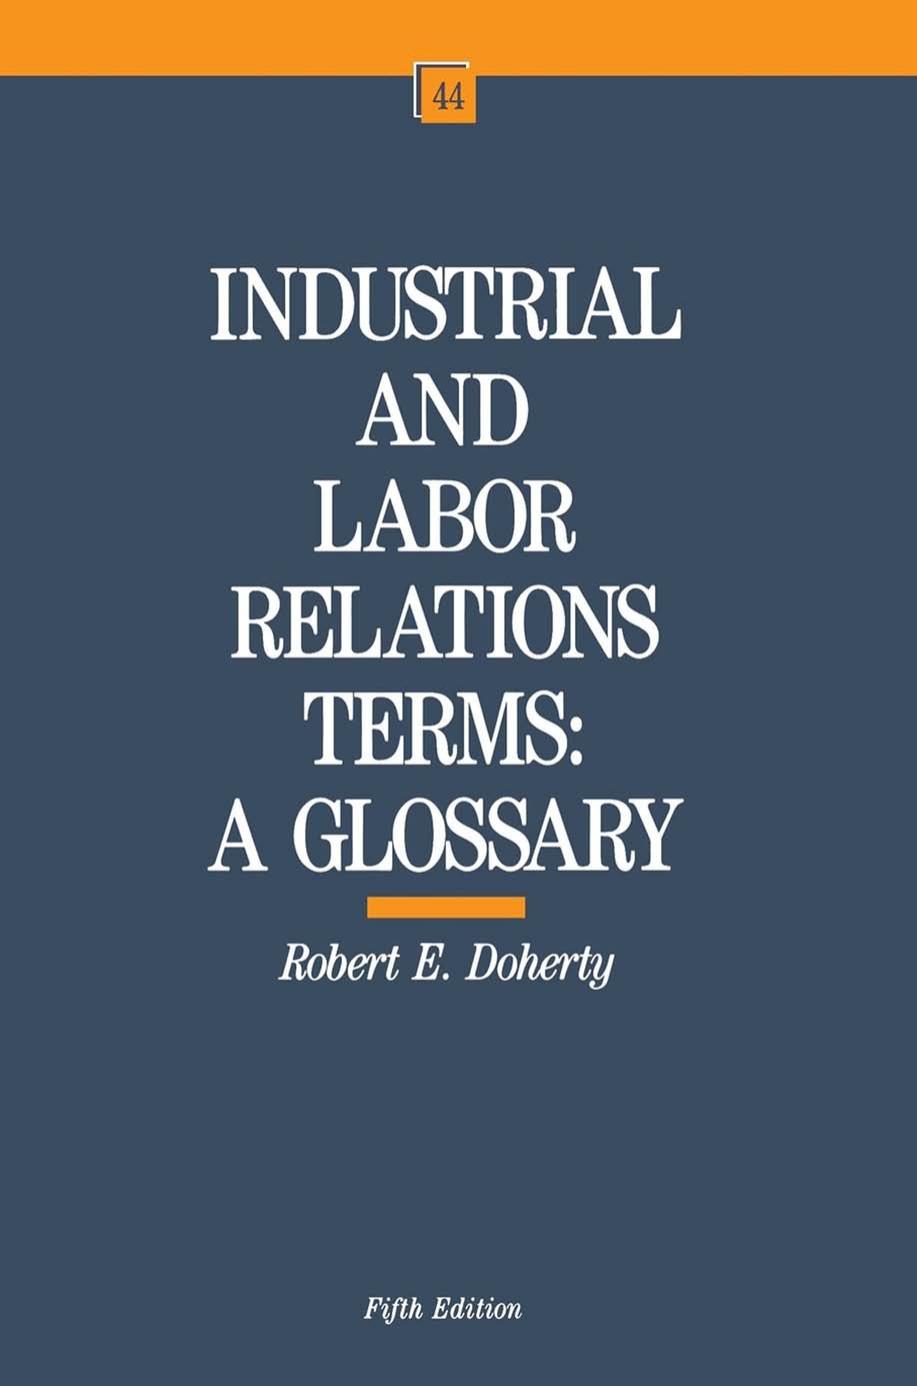 Industrial and Labor Relations Terms: A Glossary by Robert W. Doherty